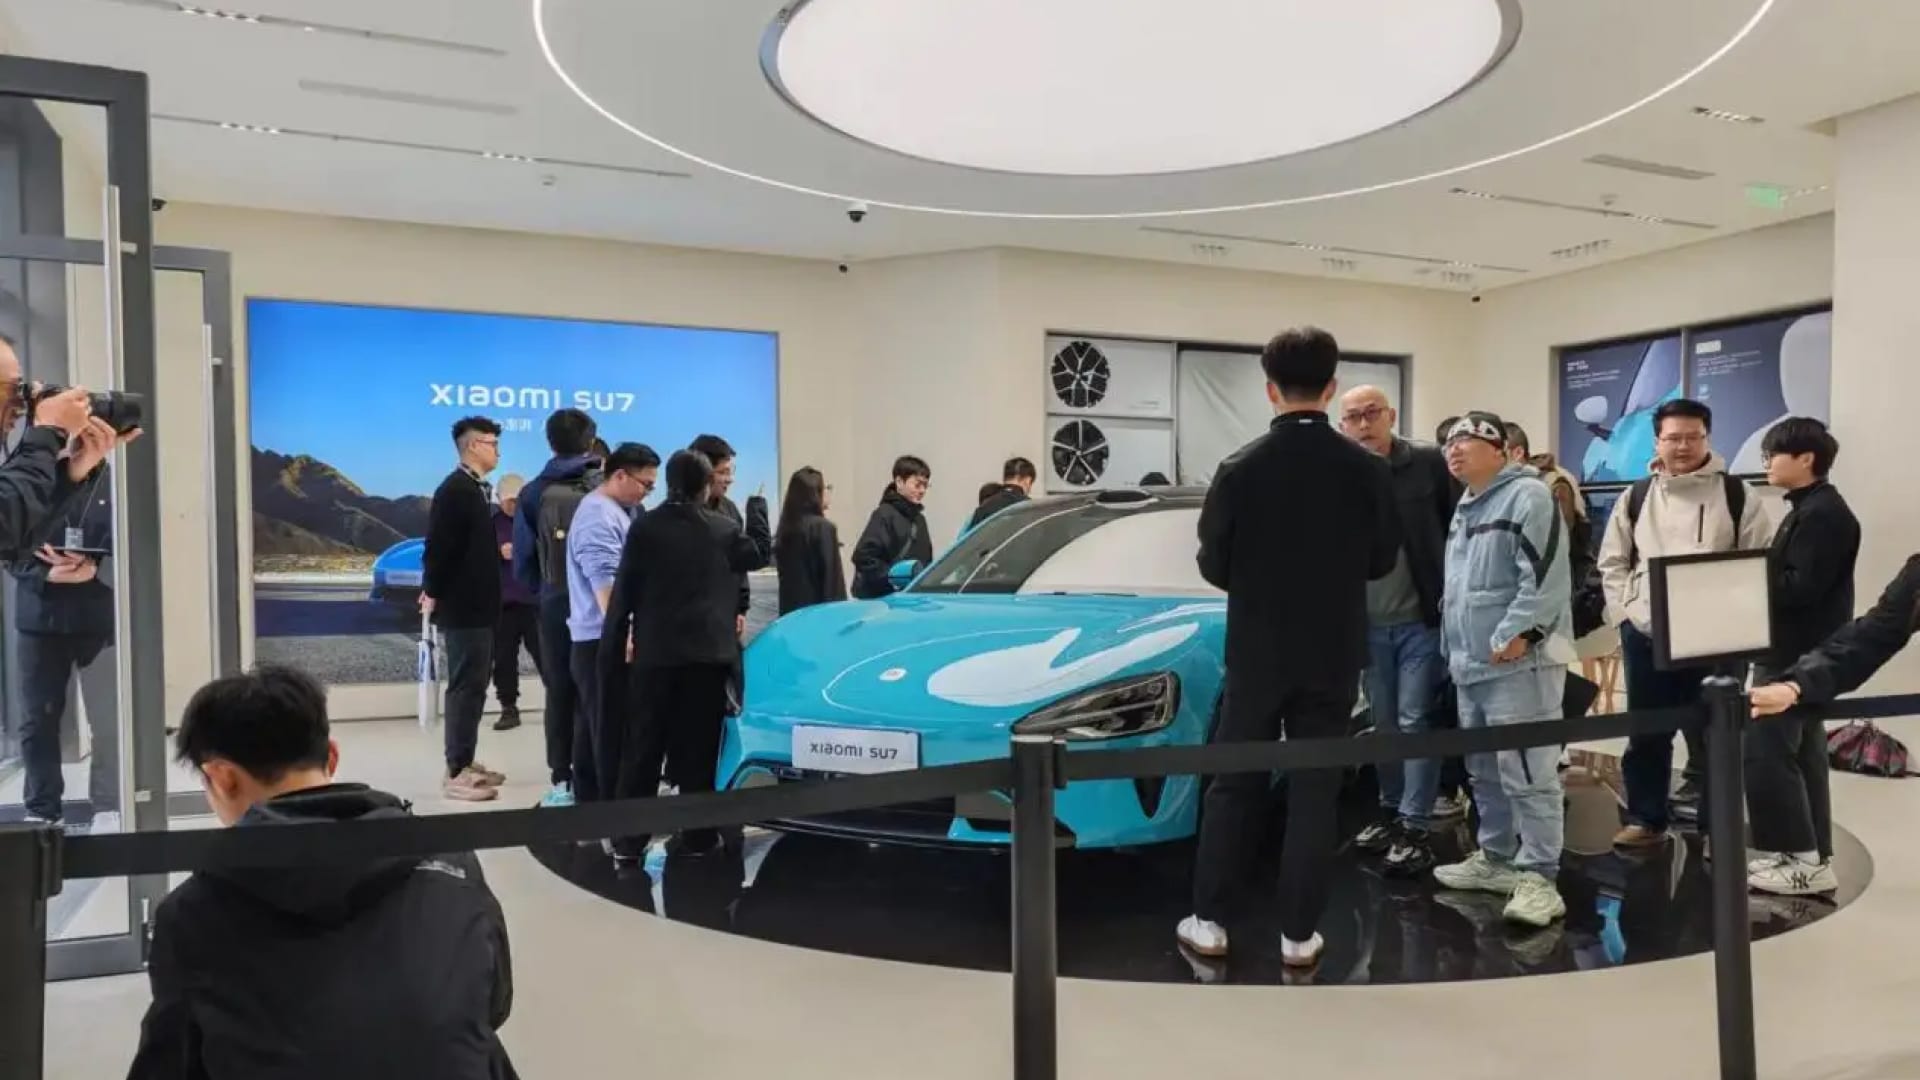 Xiaomi SU7: customers line up for test drives until 3 am